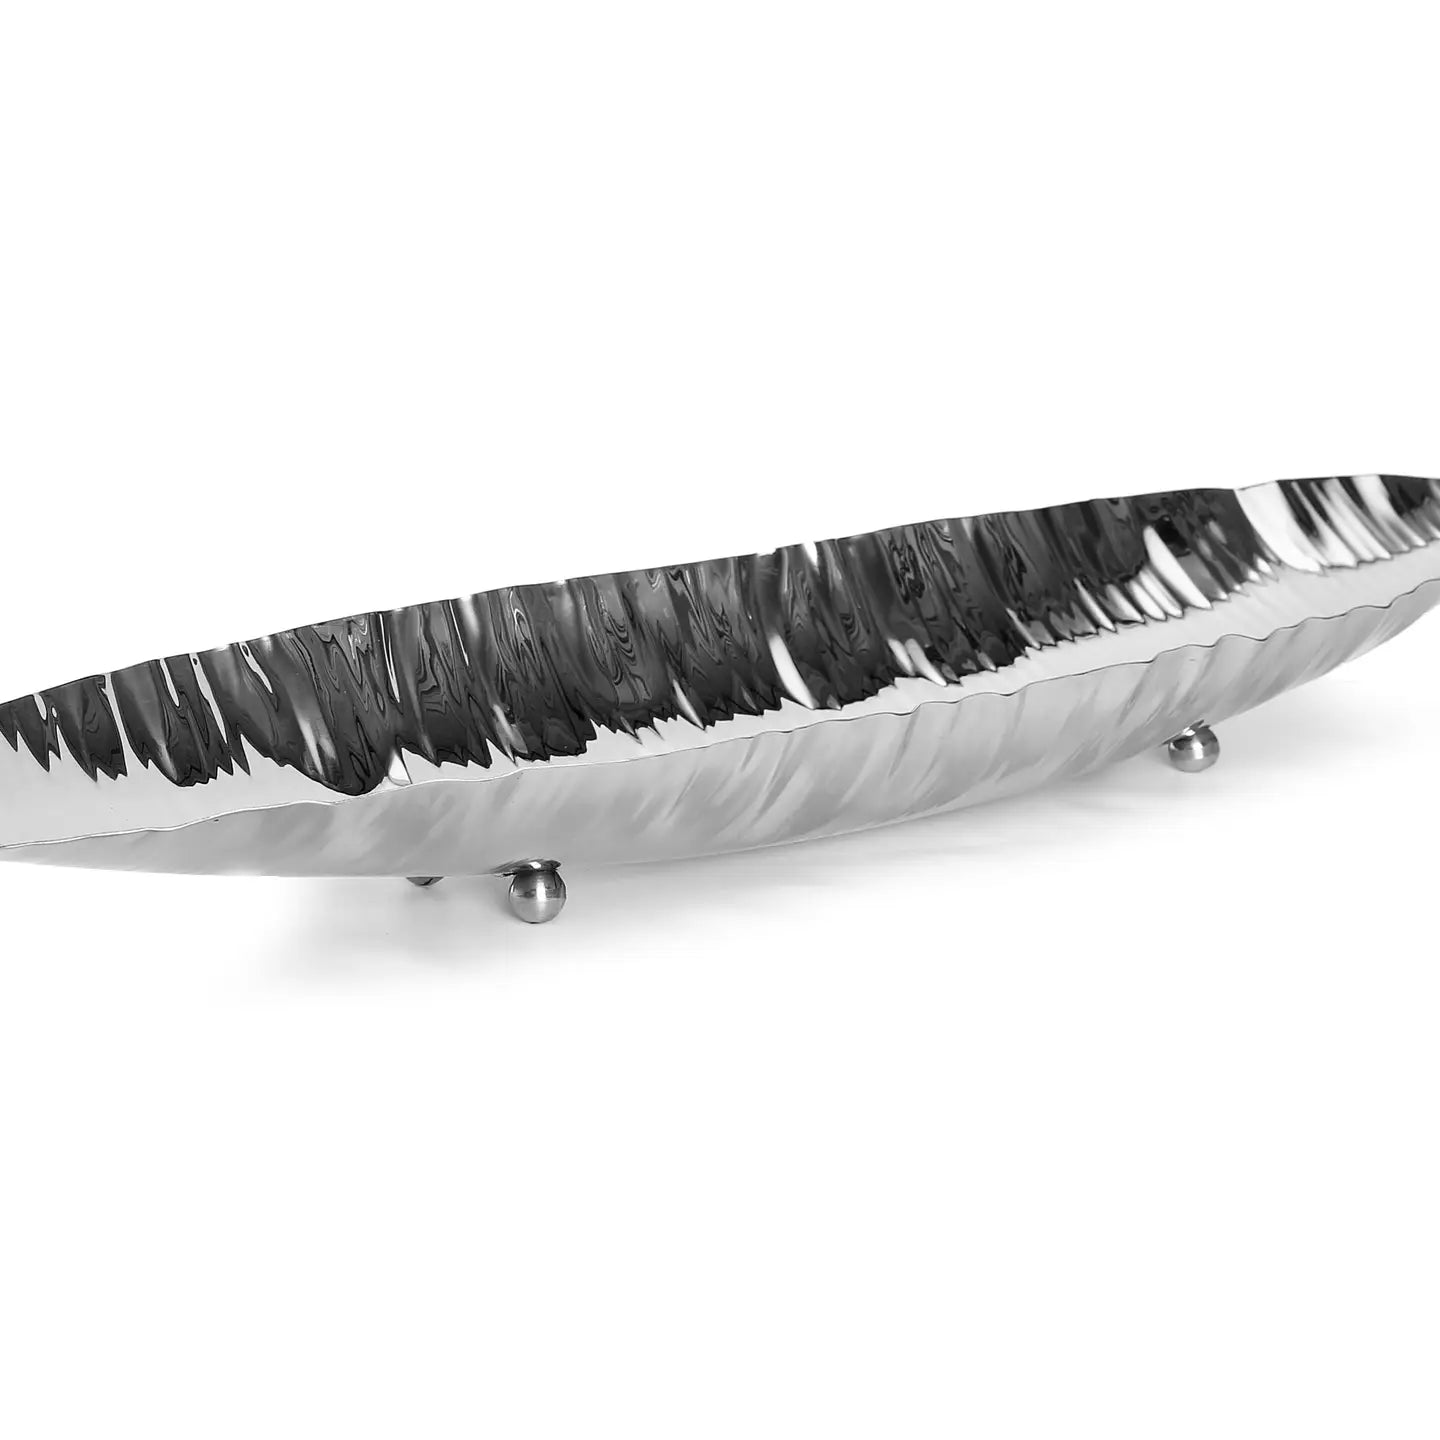 Stainless Steel Boat Dish - 20.5"L